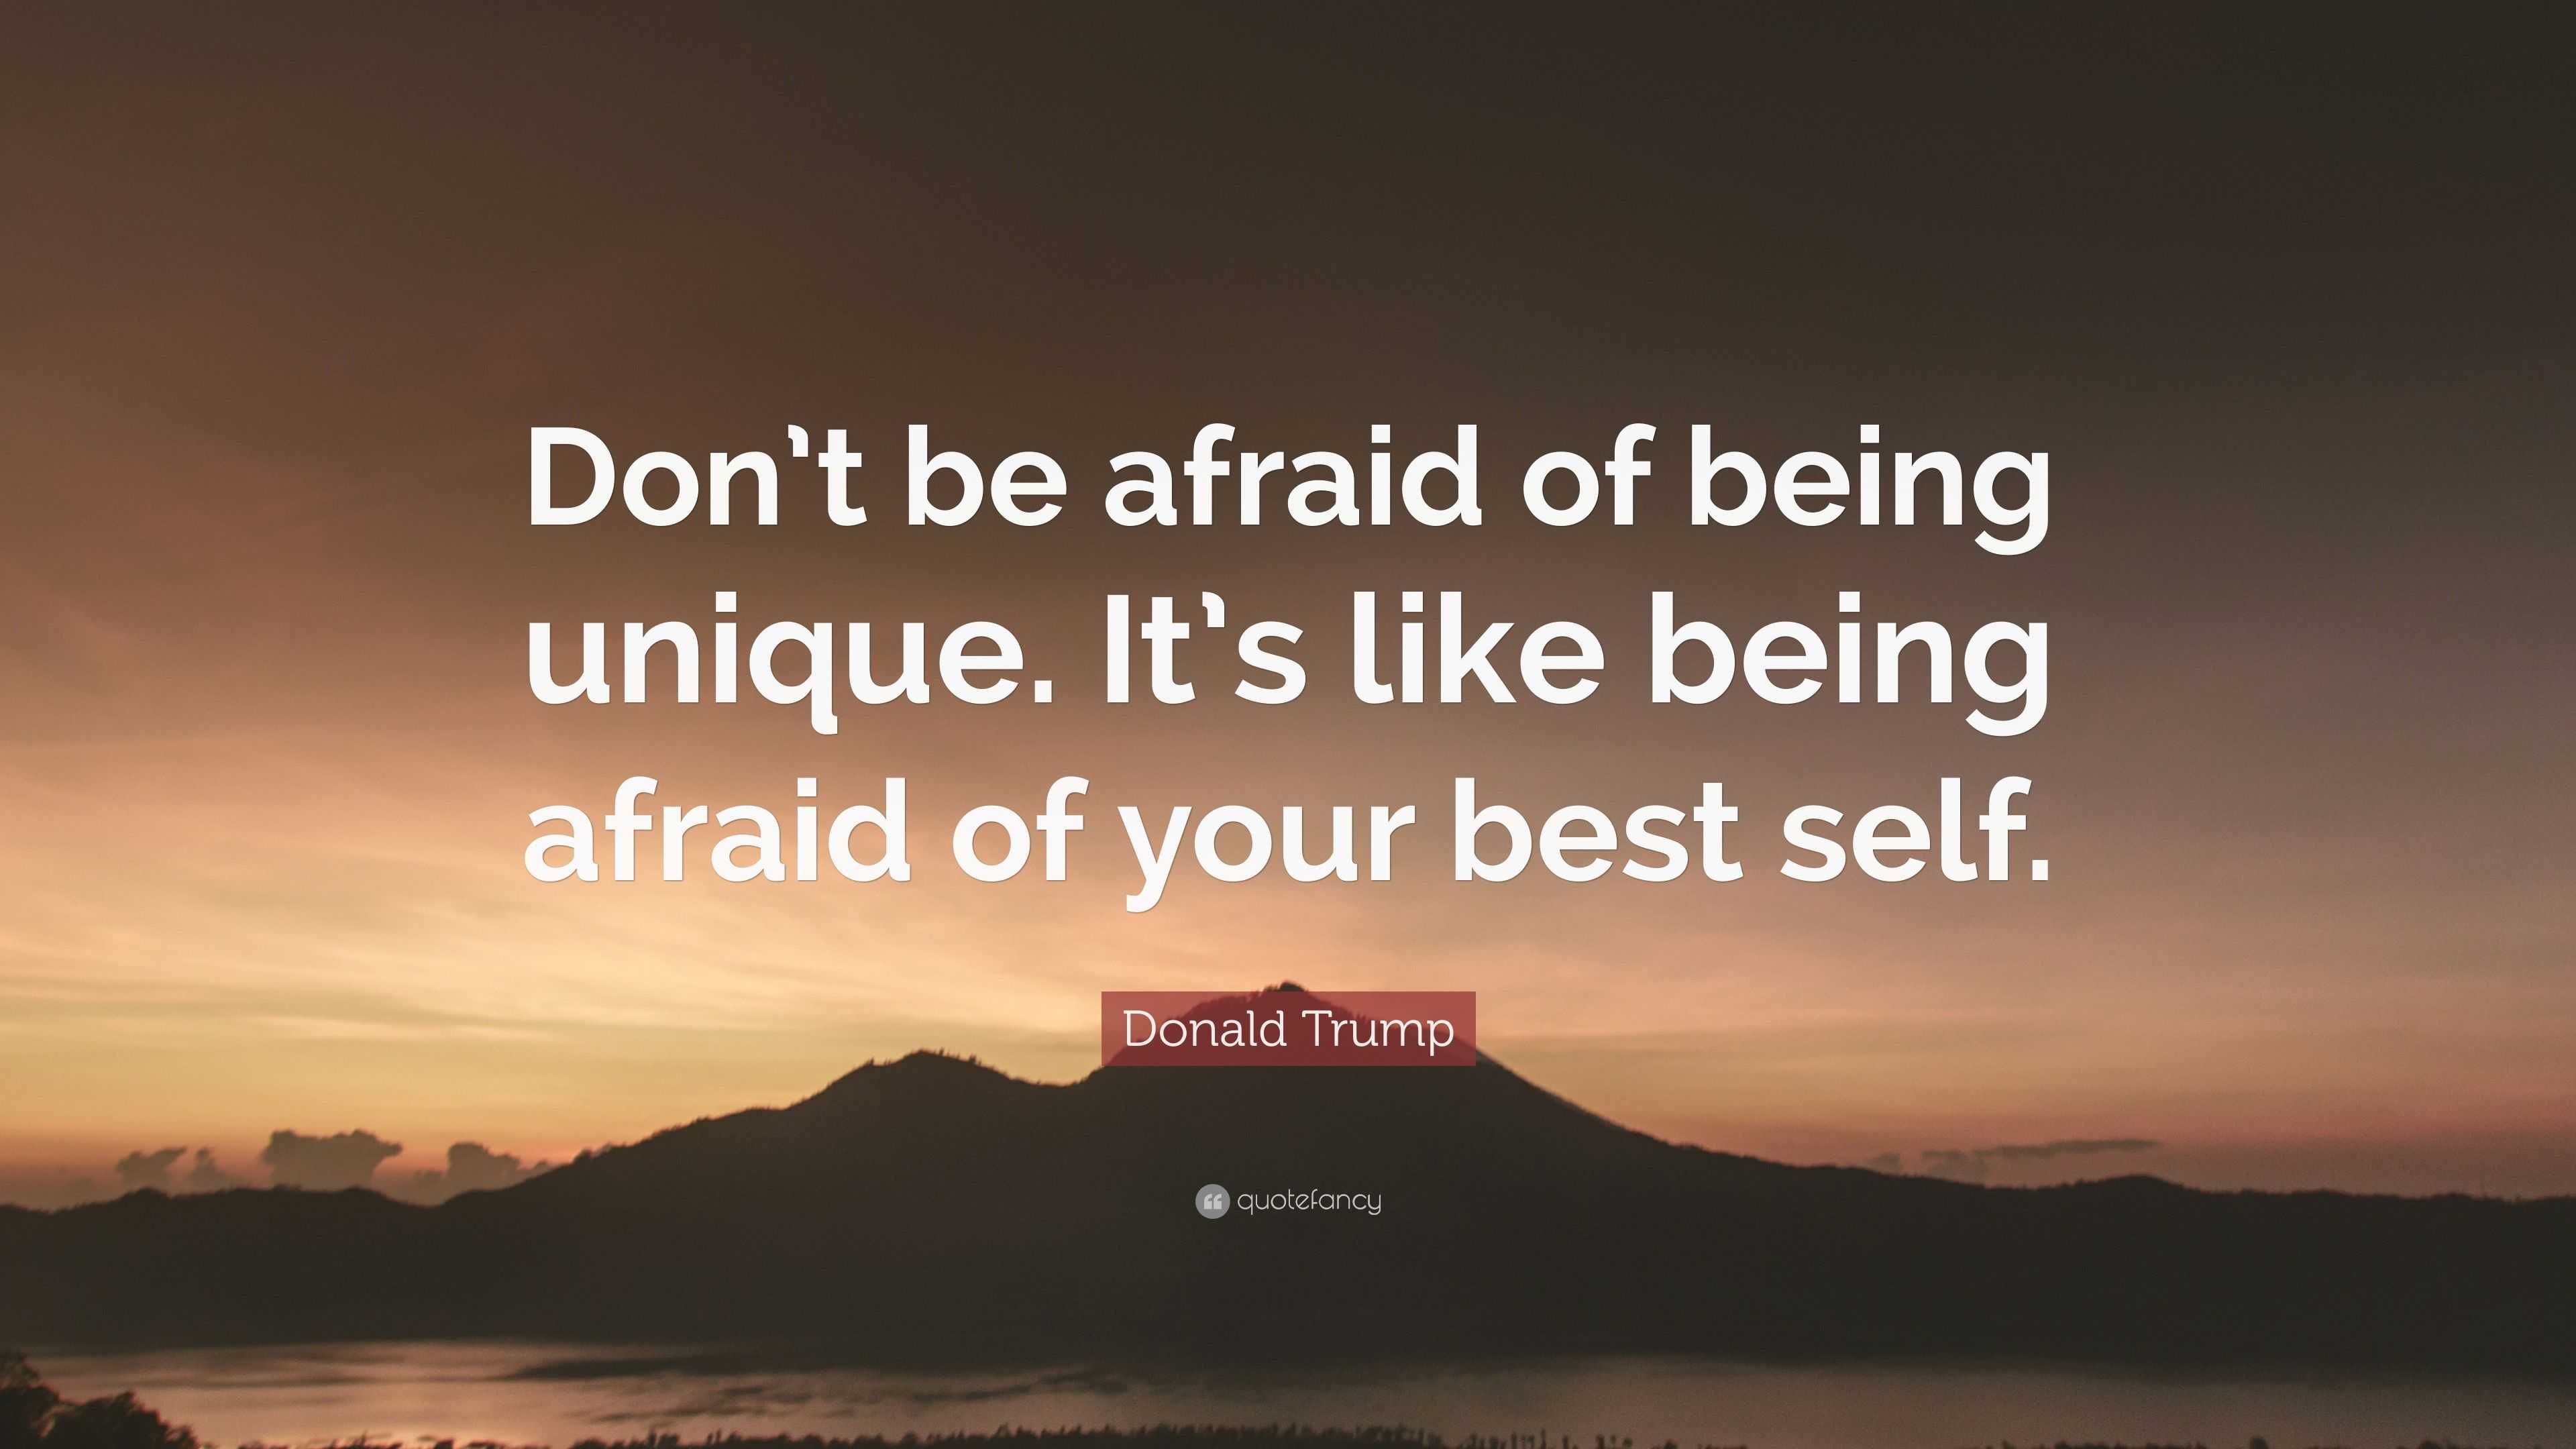 Donald Trump Quote: “Don’t be afraid of being unique. It’s like being